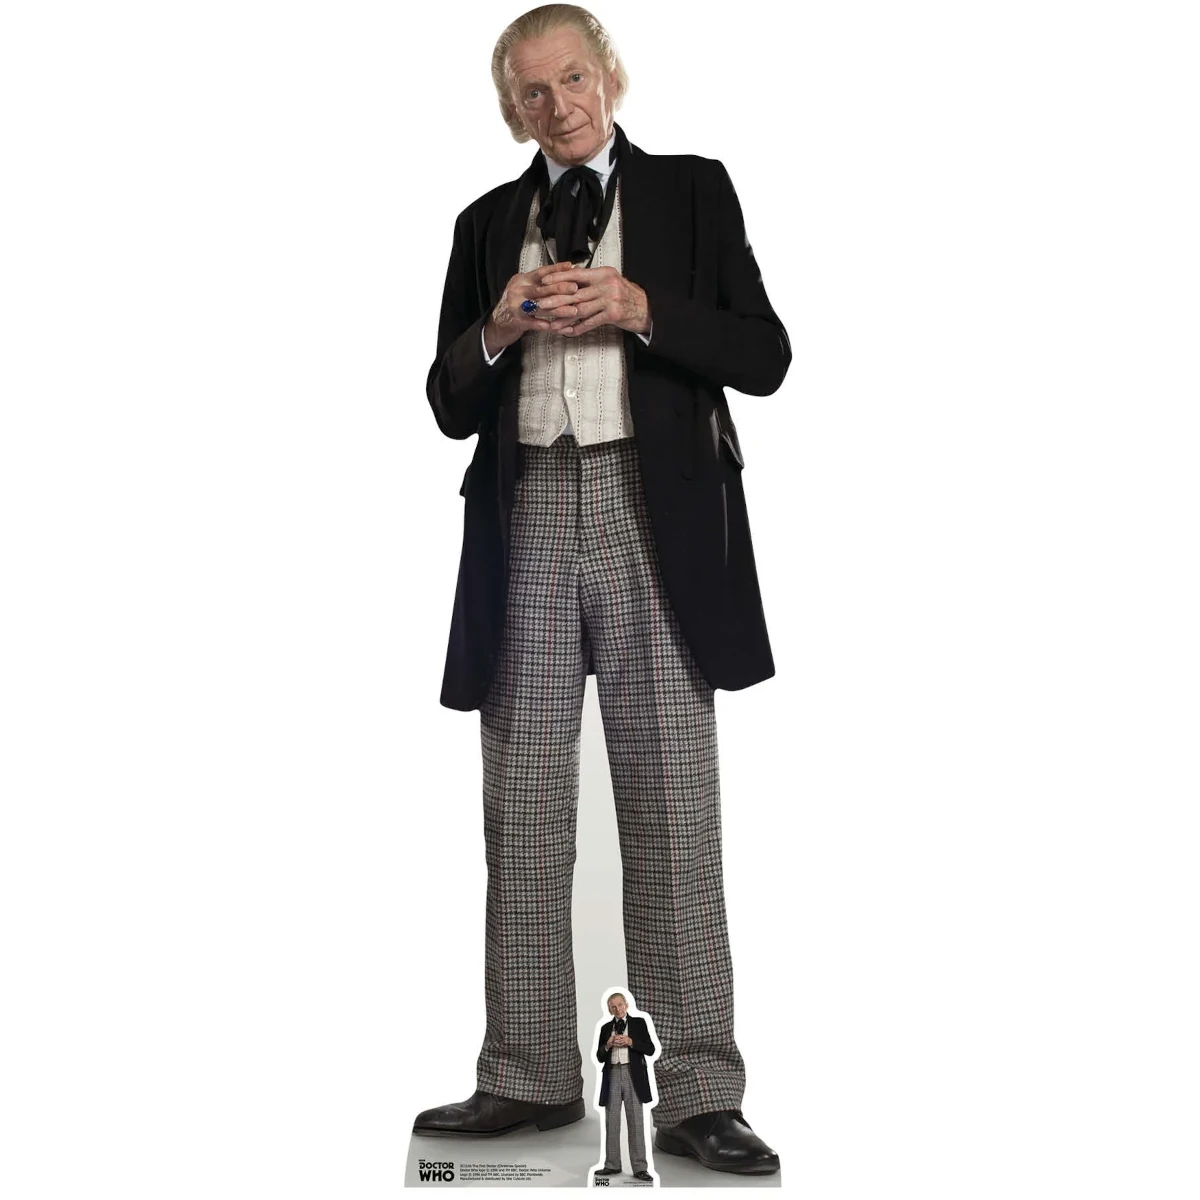 SC1116 First Doctor 'David Bradley' (Doctor Who) Official Lifesize + Mini Cardboard Cutout Standee Front